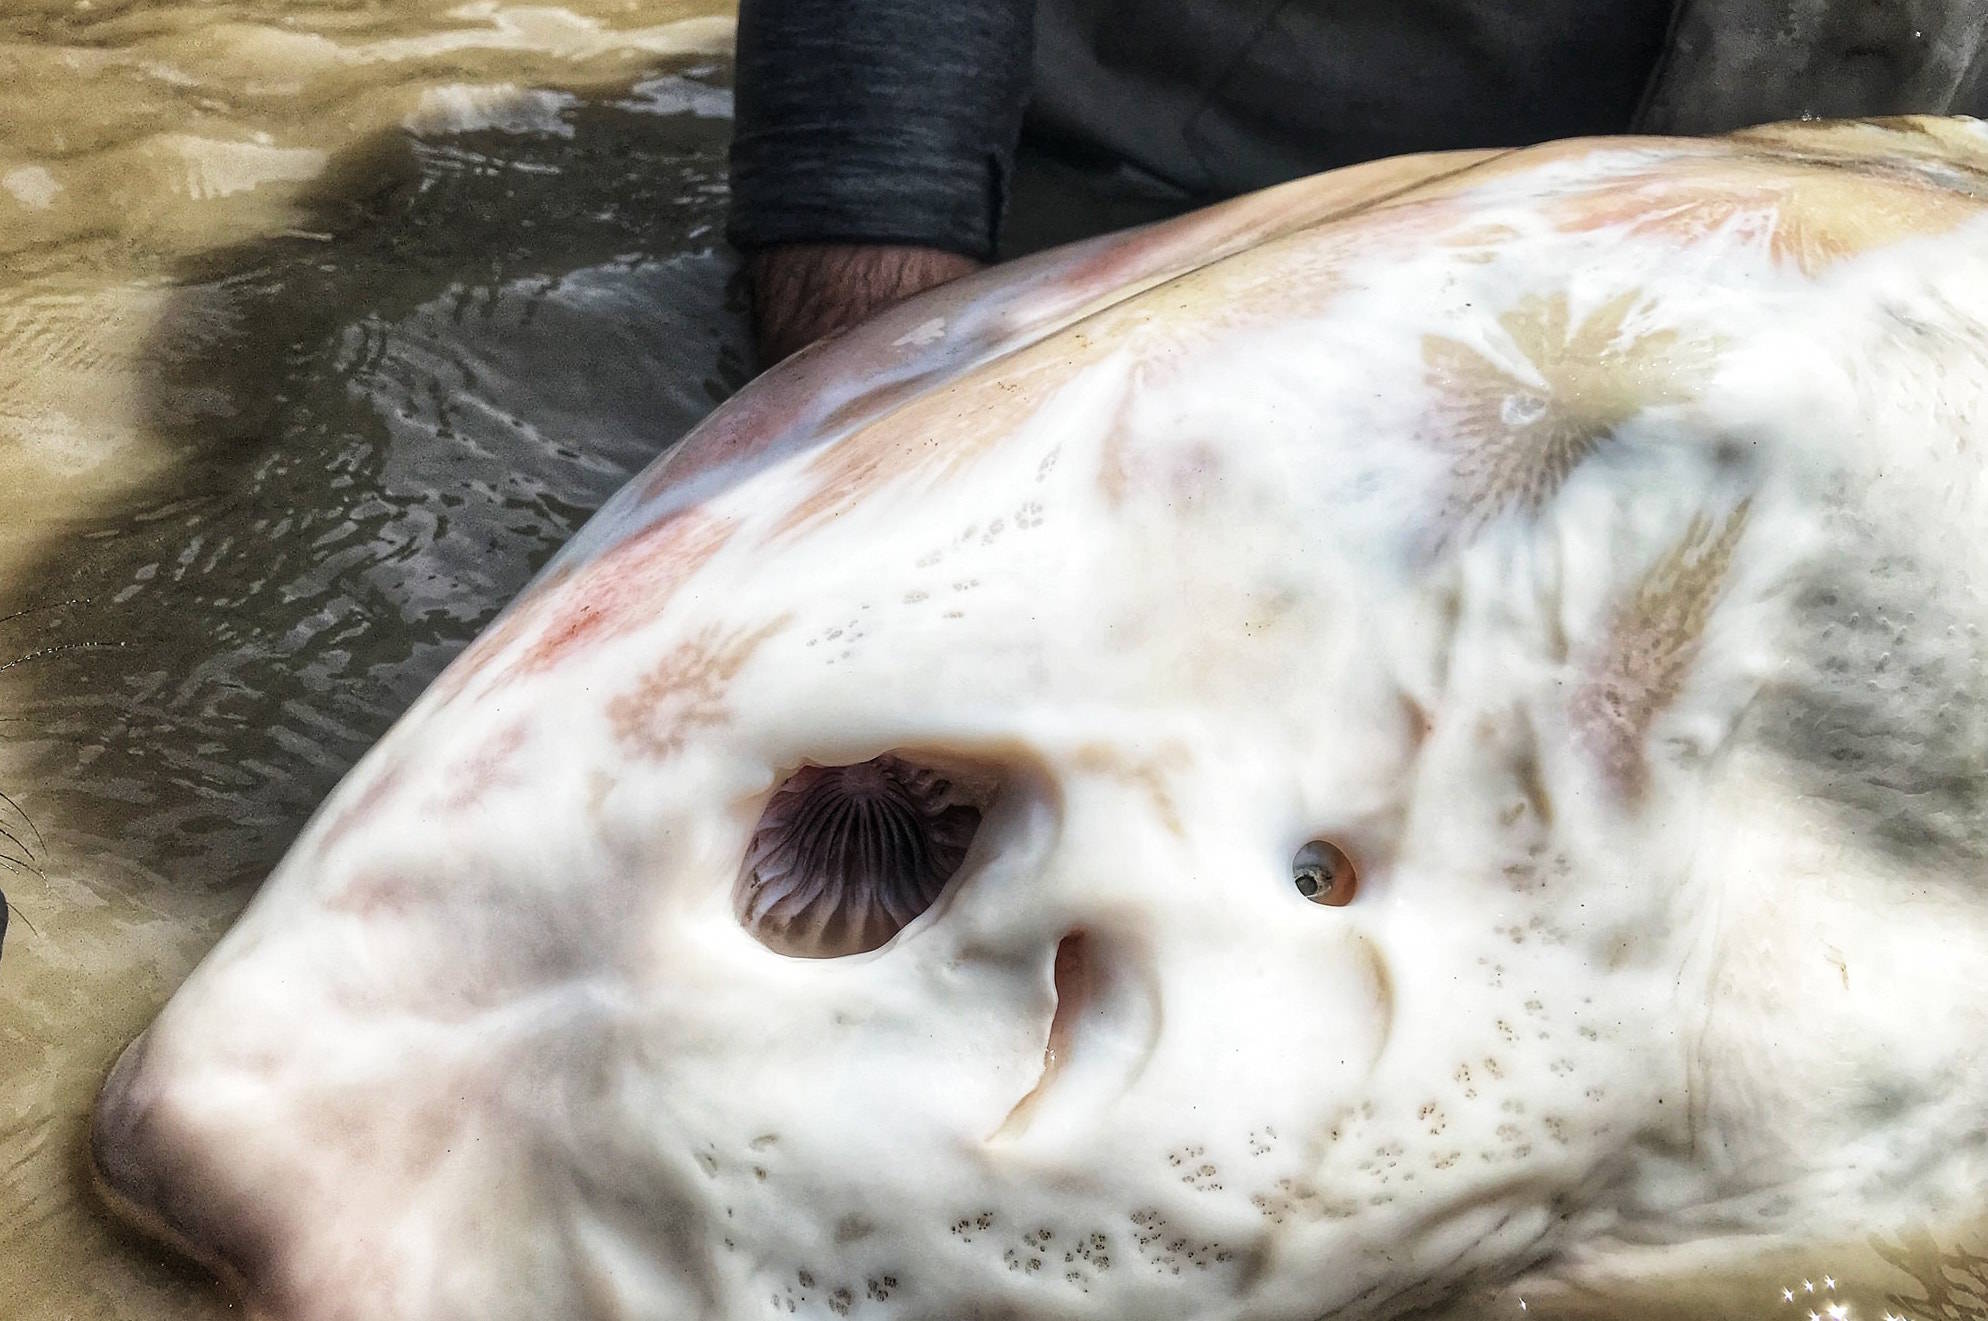 Albino sturgeon with freakishly large nostrils reeled in from